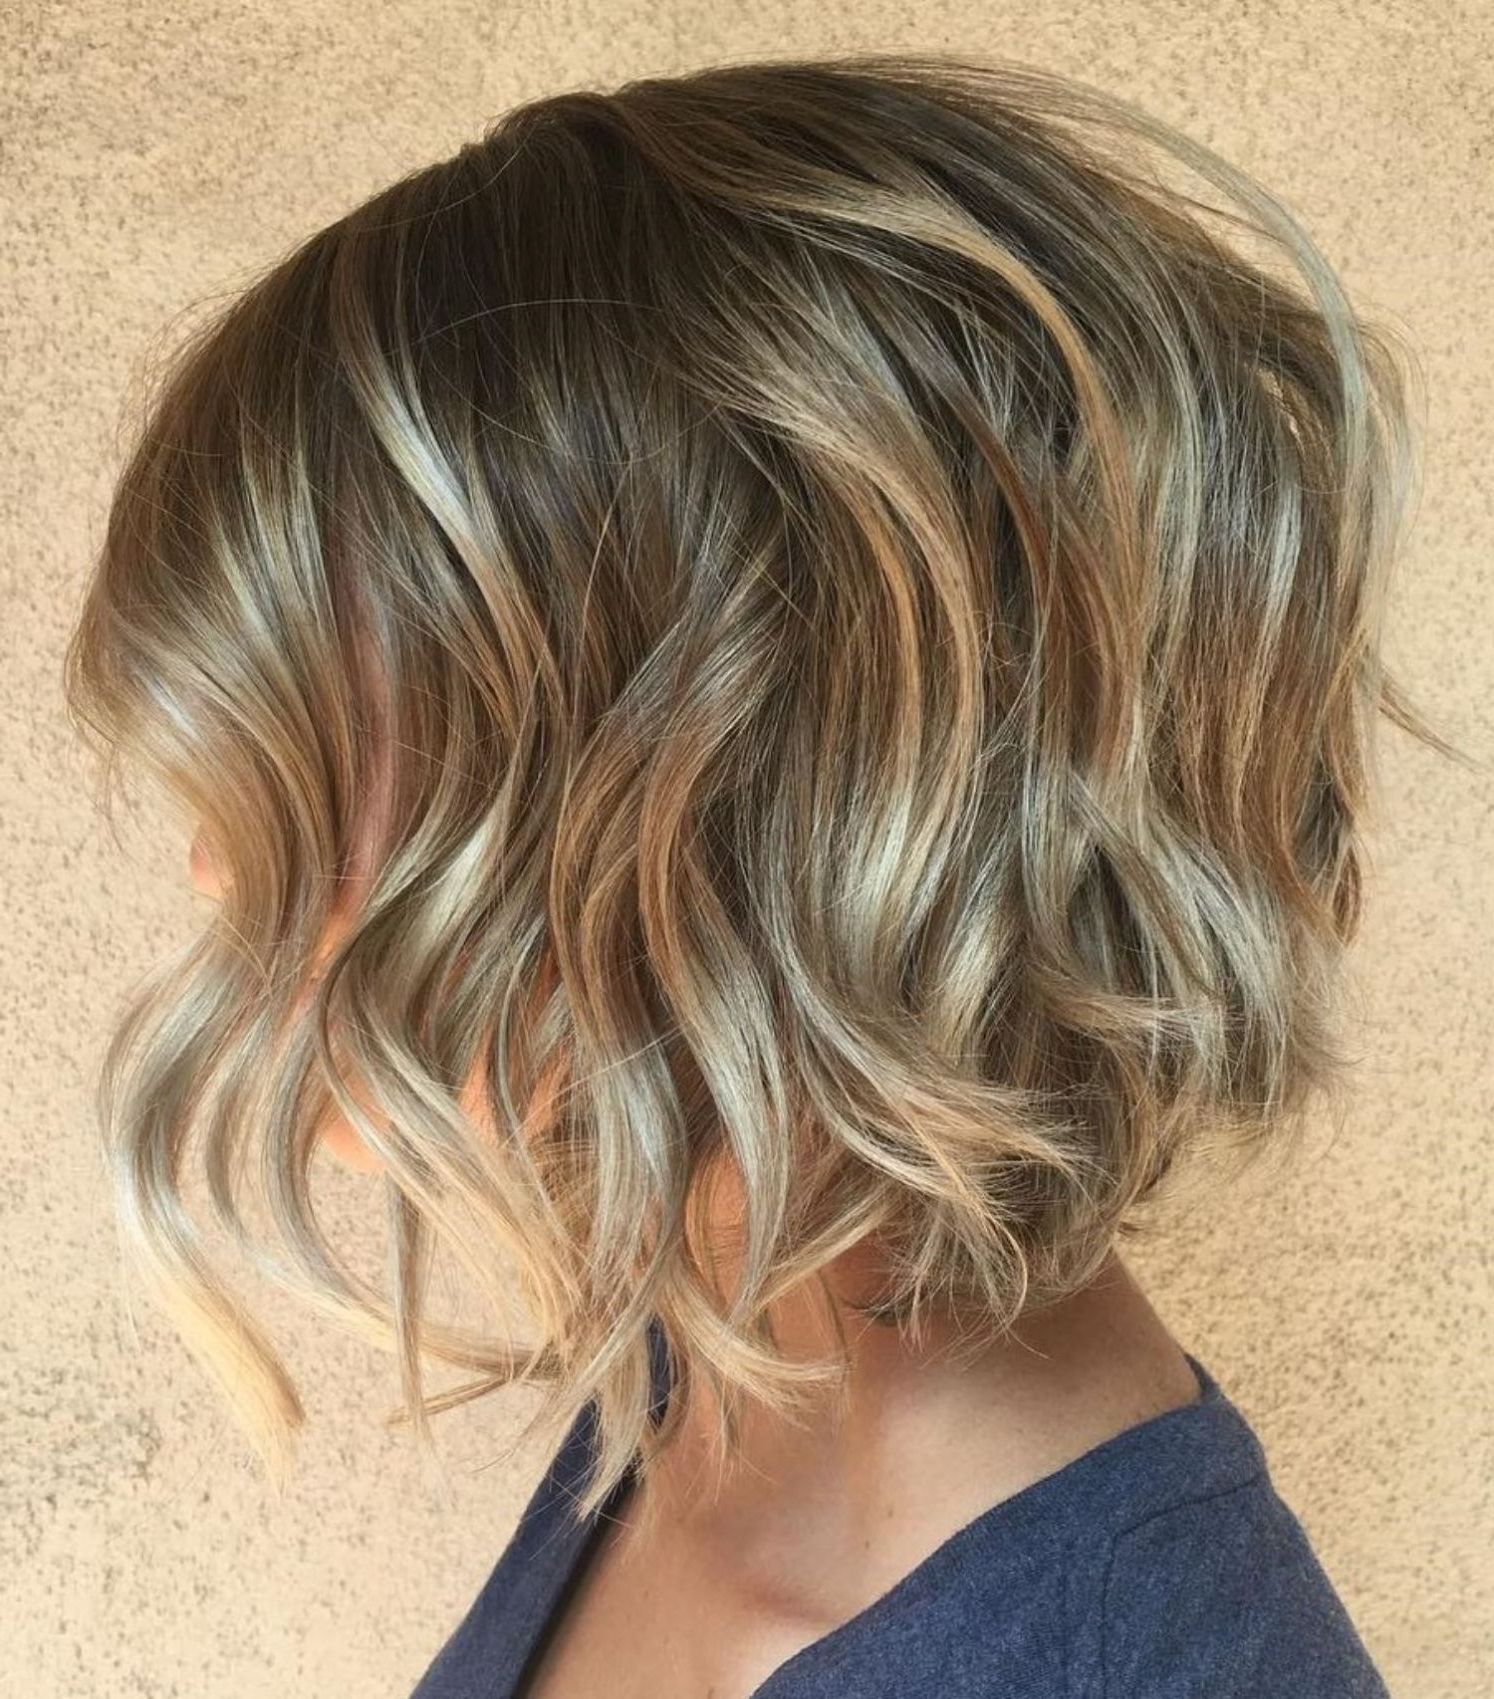 60 Best Short Bob Haircuts And Hairstyles For Women (View 7 of 20)